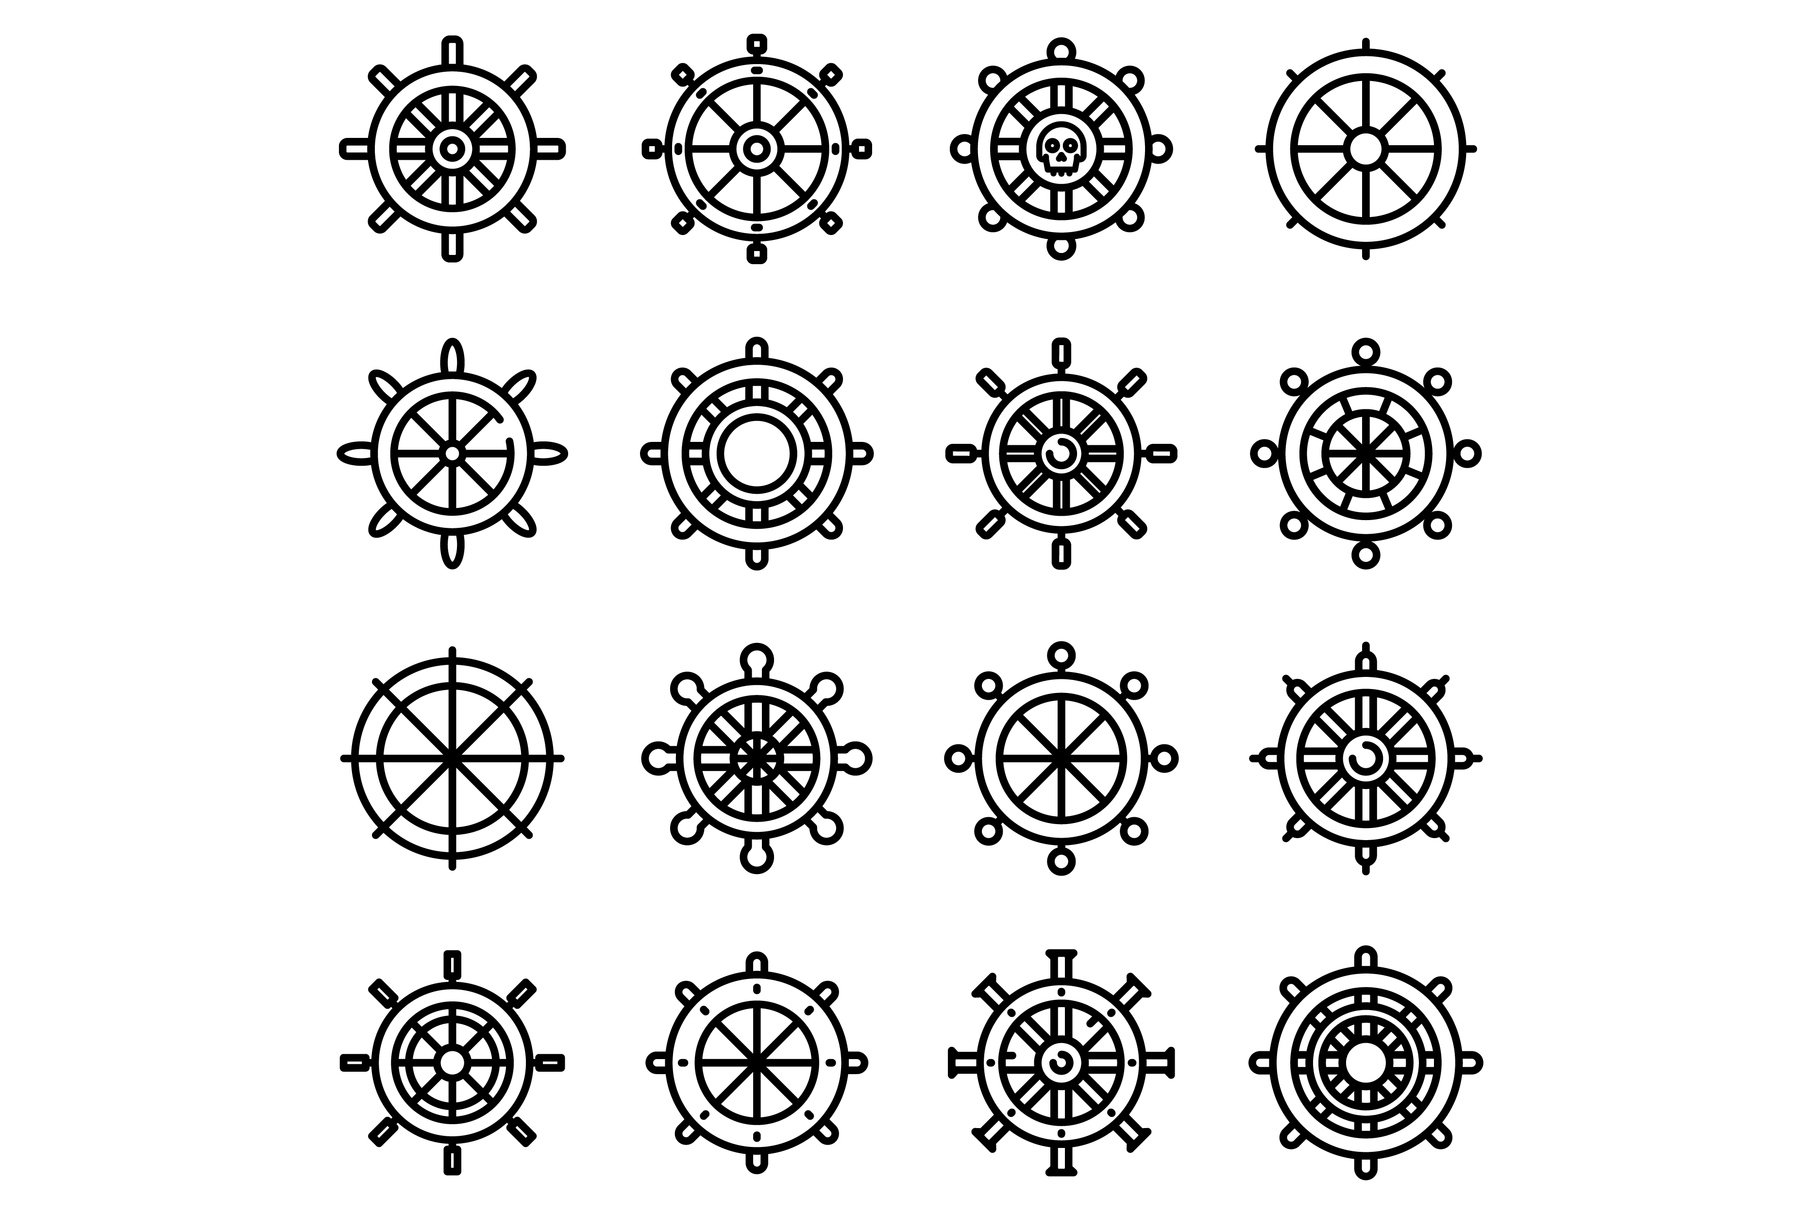 Ship wheel icons set, outline style cover image.